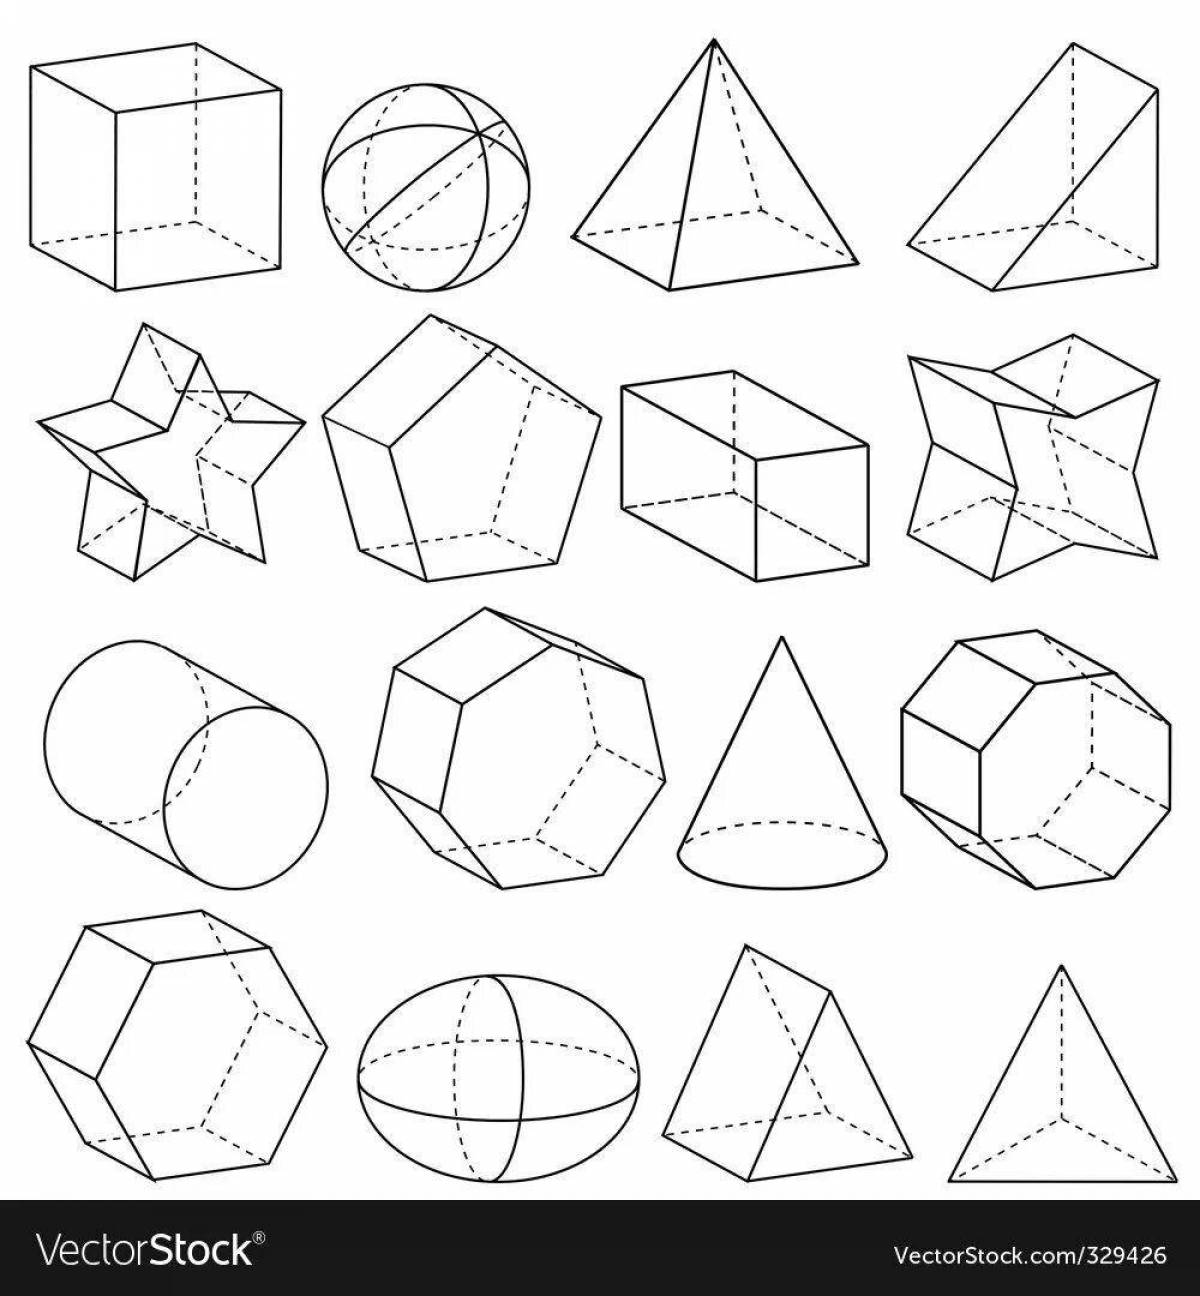 Animated 3D figure coloring page